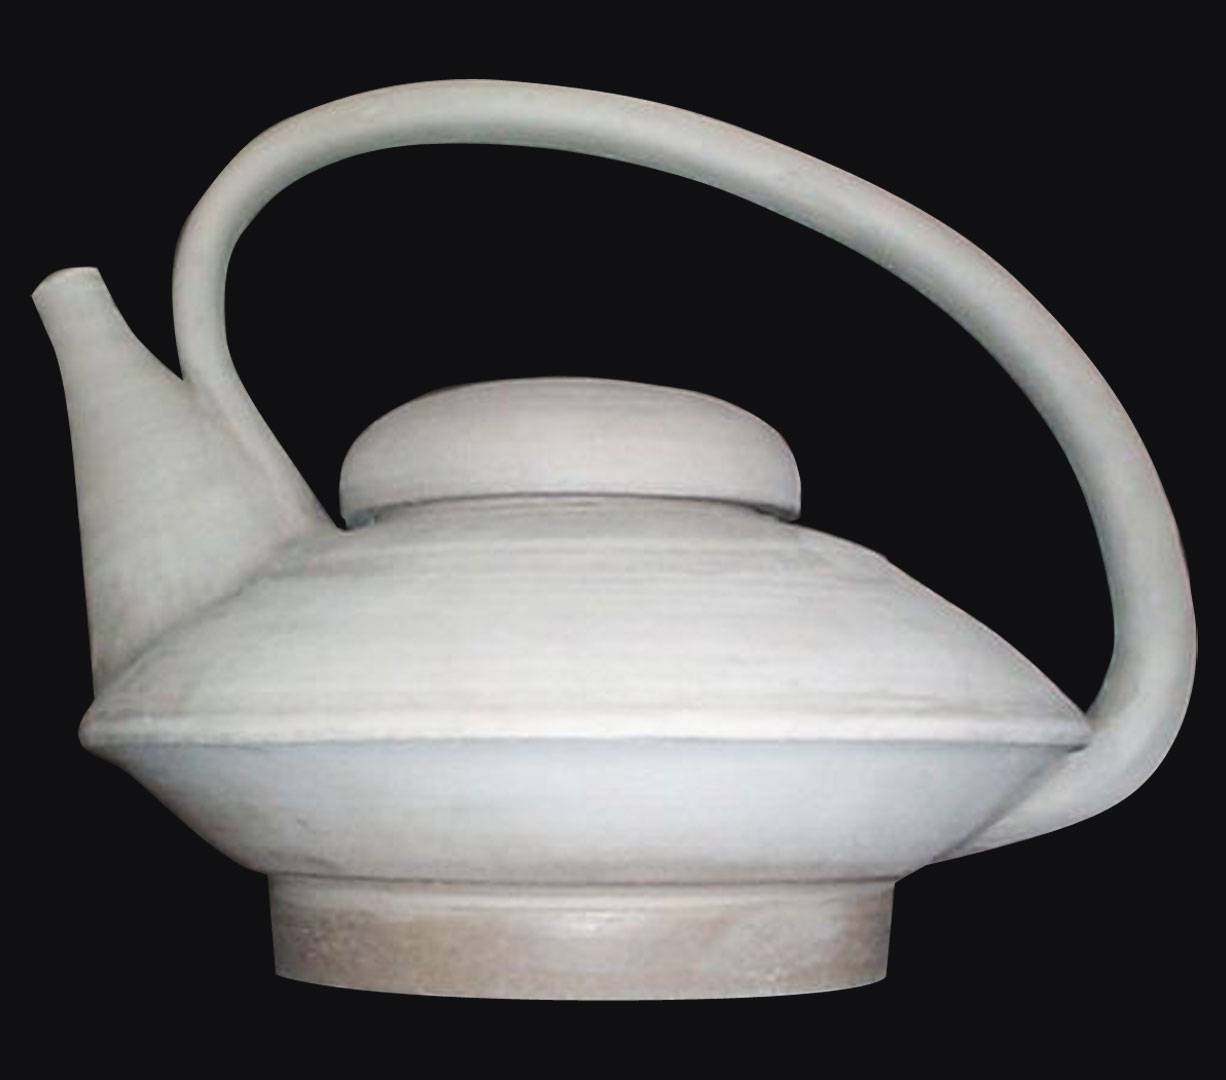 Flying Saucer Teapot: I Want to Believe